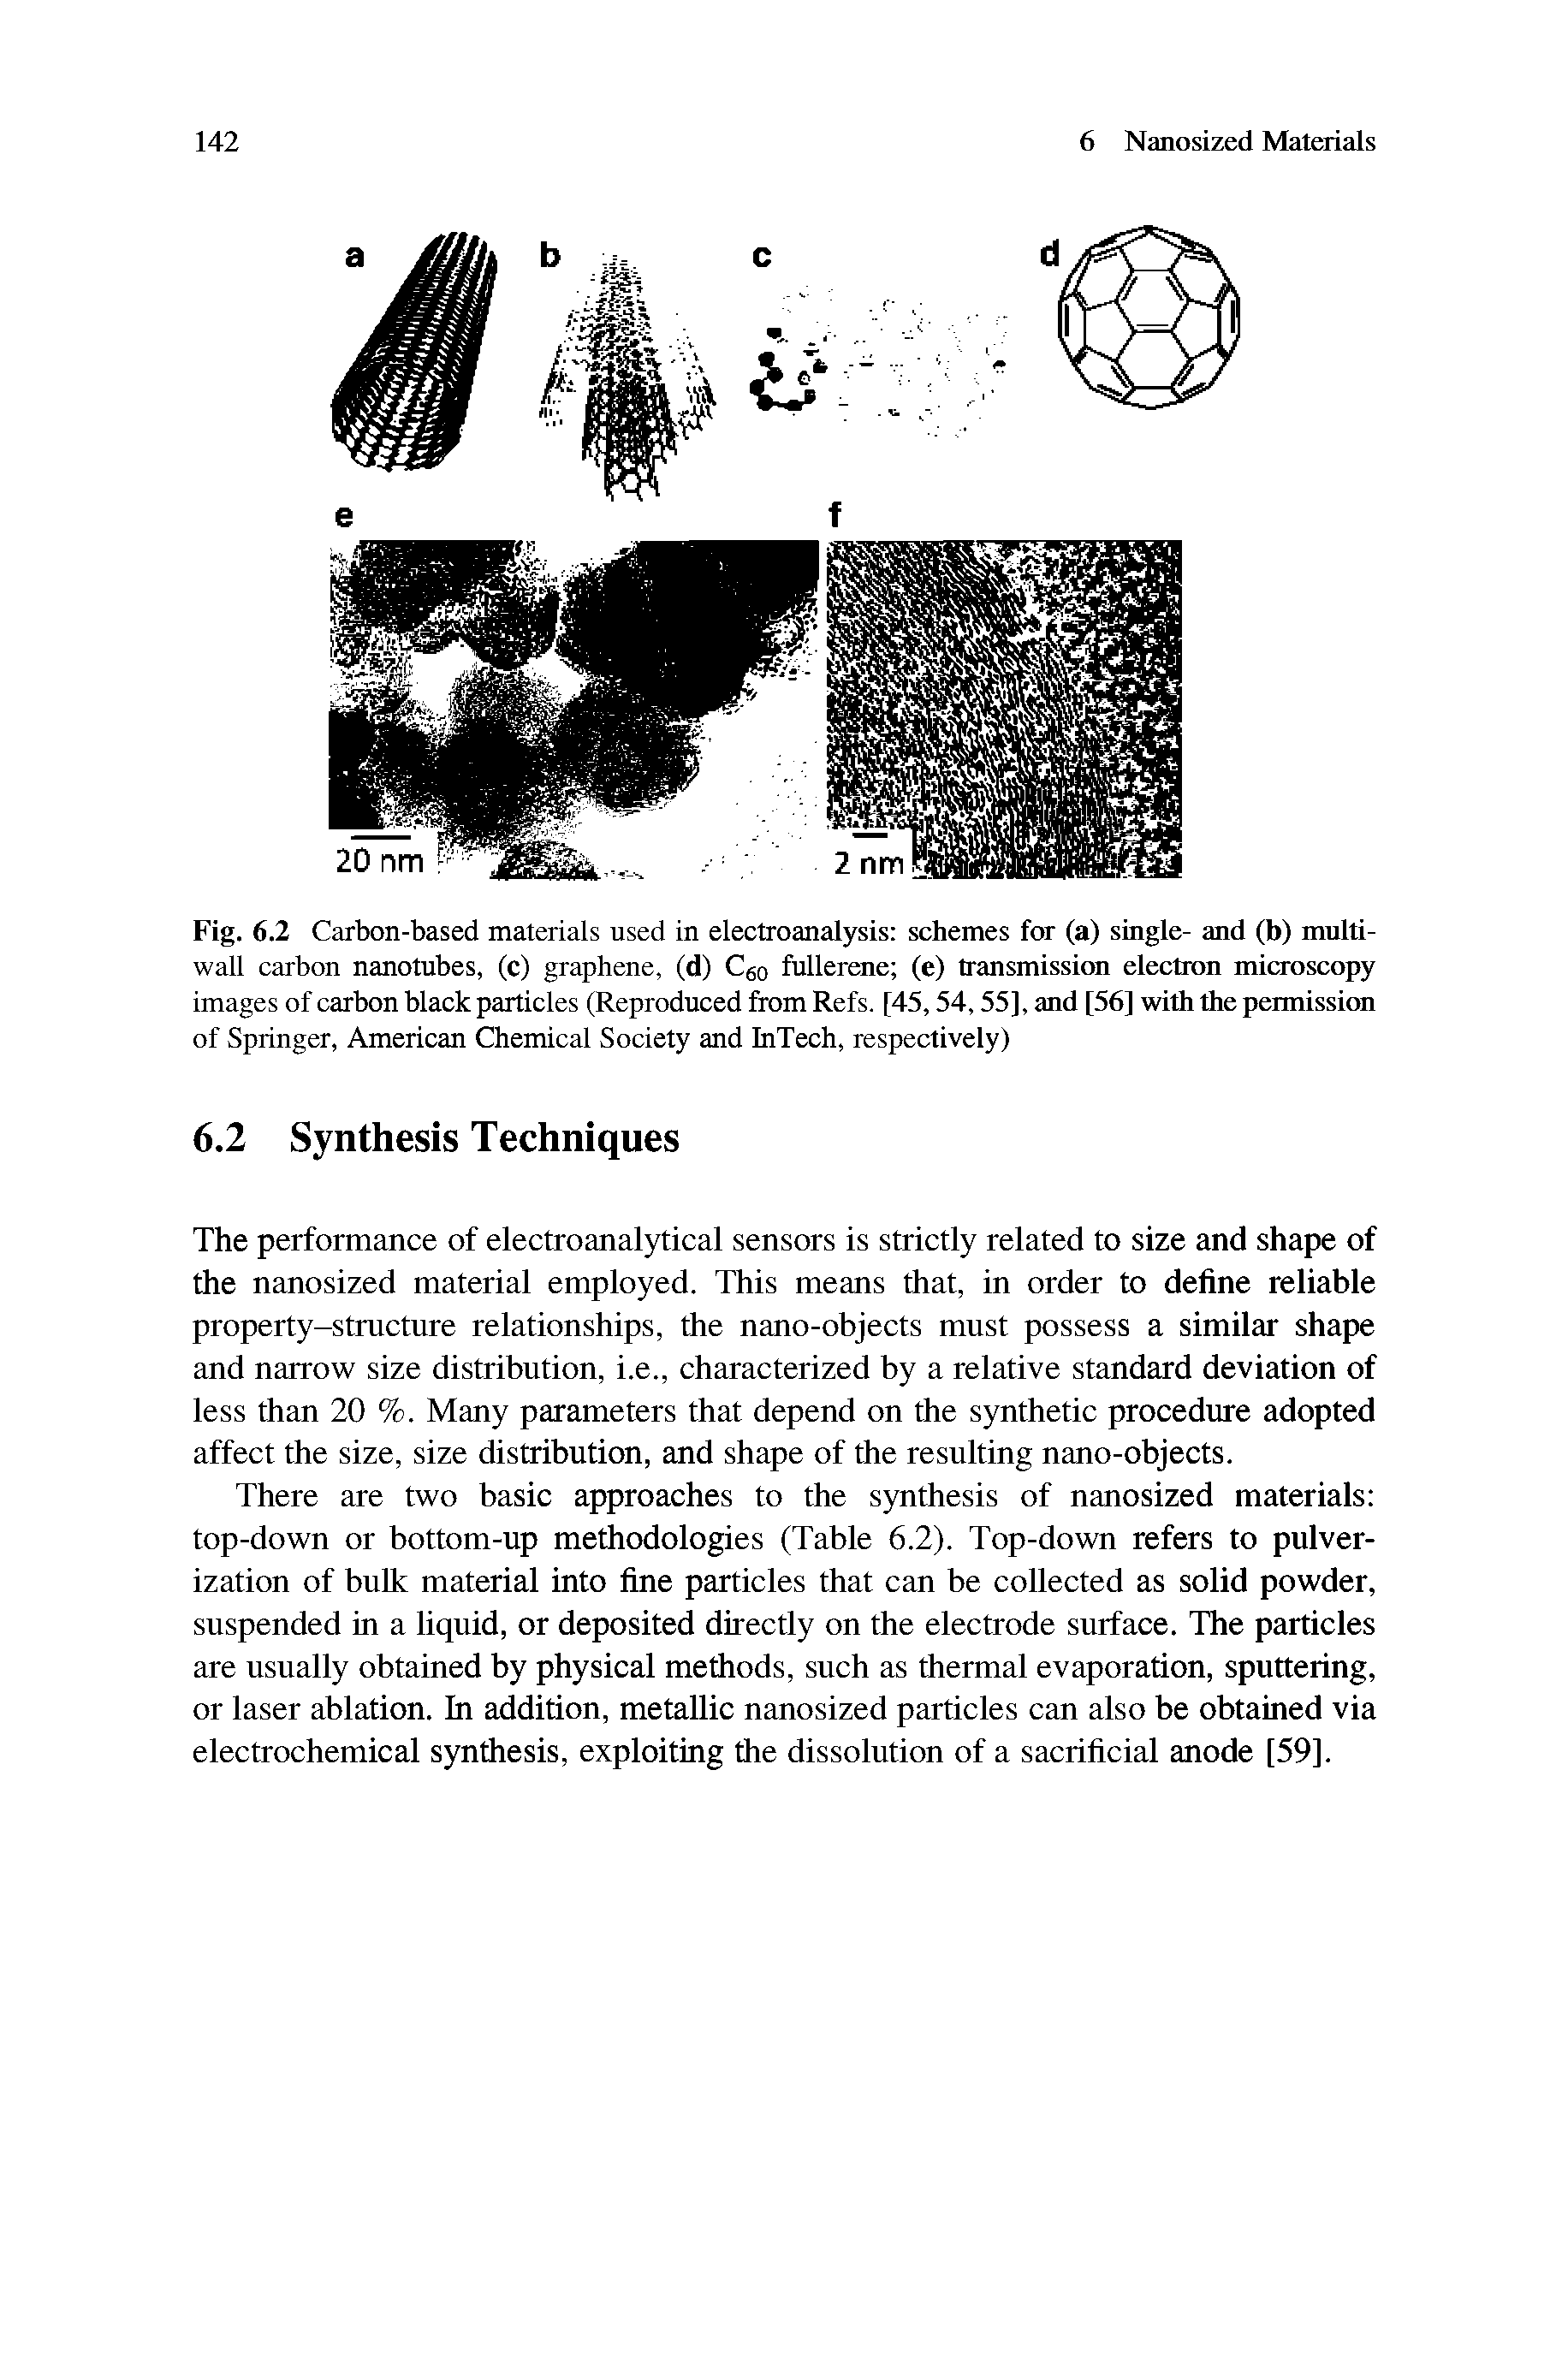 Fig. 6.2 Carbon-based materials used in electroanalysis schemes for (a) single- and (b) multiwall carbon nanotubes, (c) graphene, (d) C o fullerene (e) transmission electron microscopy images of carbon black particles (Reproduced from Refs. [45,54,55], and [56] with the permission of Springer, American Chemical Society and InTech, respectively)...